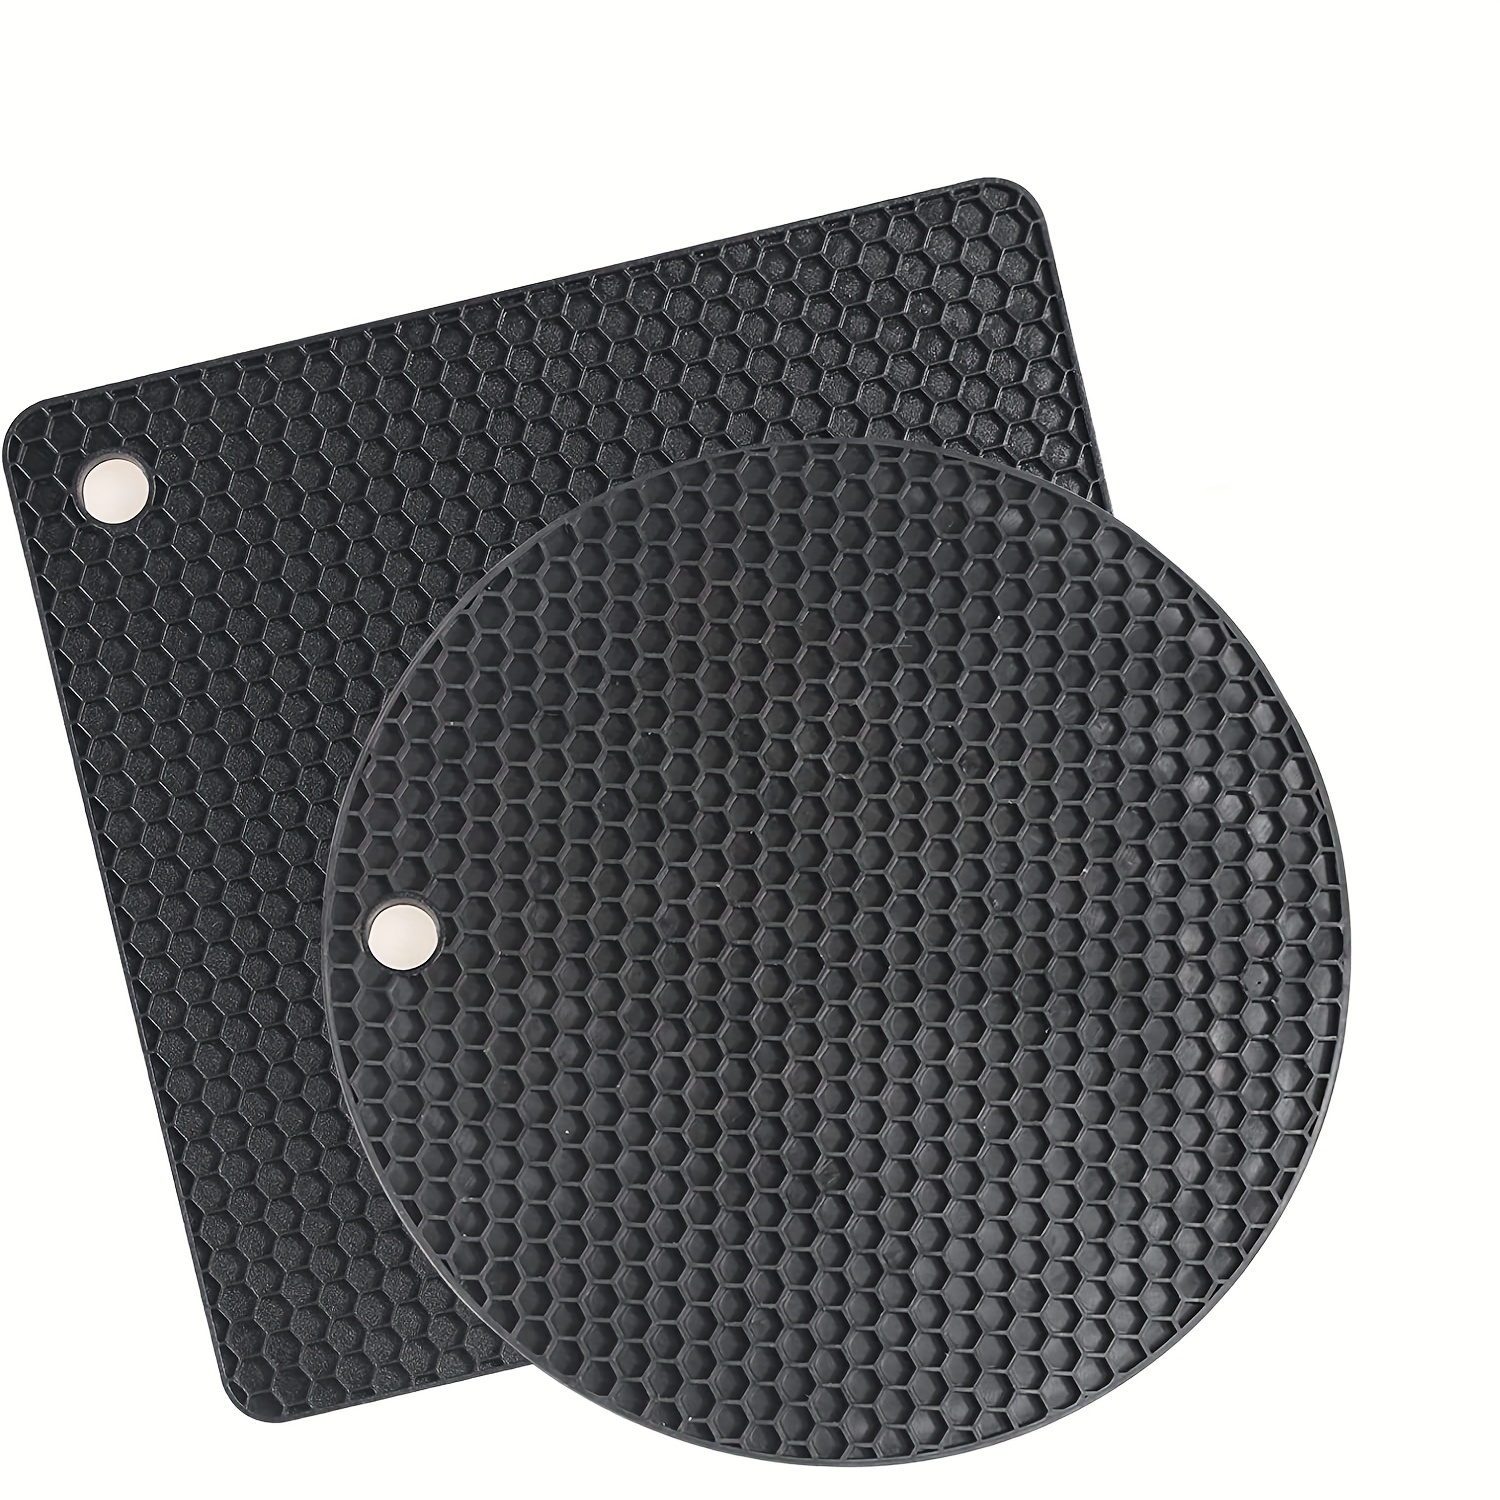 Hot Pads for Kitchen Silicone Mats for Hot Pots Silicone Mats for